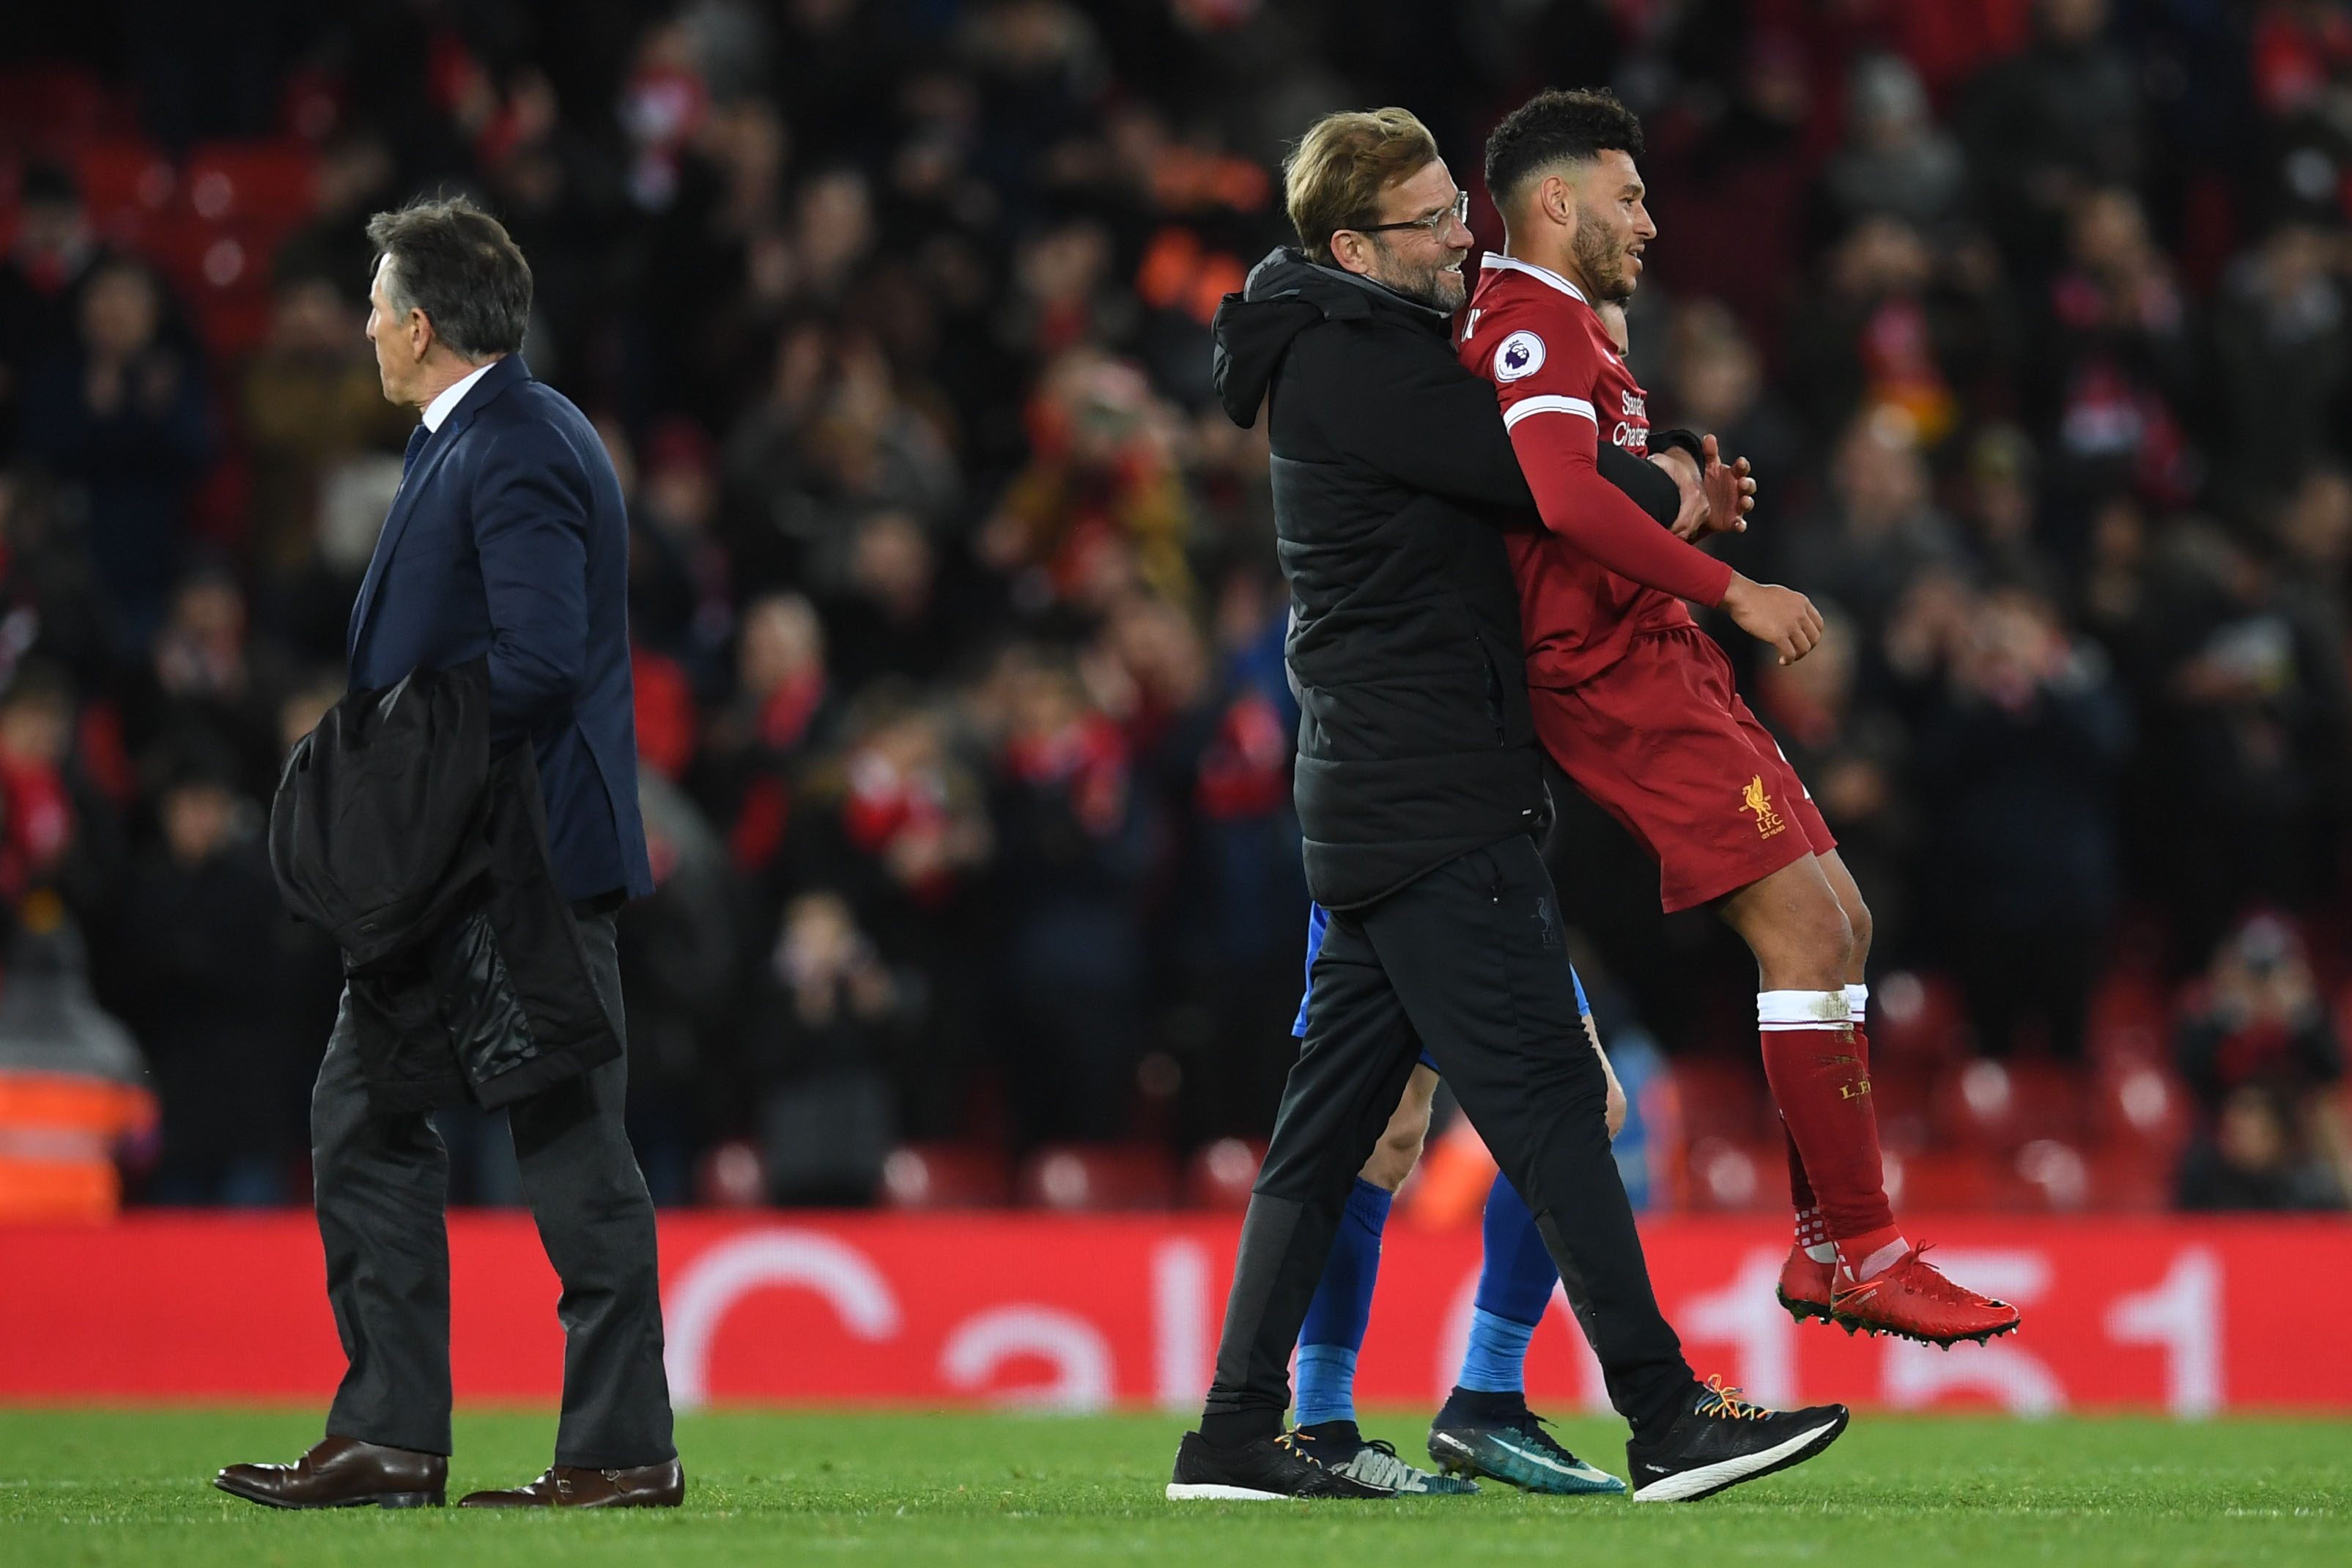 Liverpool's German manager Jurgen Klopp (C) congratulates Liverpool's English midfielder Alex Oxlade-Chamberlain (R) as Leicester City's French manager Claude Puel walks after the English Premier League football match between Liverpool and Leicester at Anfield in Liverpool, north west England on December 30, 2017. / AFP PHOTO / Paul ELLIS / RESTRICTED TO EDITORIAL USE. No use with unauthorized audio, video, data, fixture lists, club/league logos or 'live' services. Online in-match use limited to 75 images, no video emulation. No use in betting, games or single club/league/player publications.  /         (Photo credit should read PAUL ELLIS/AFP/Getty Images)